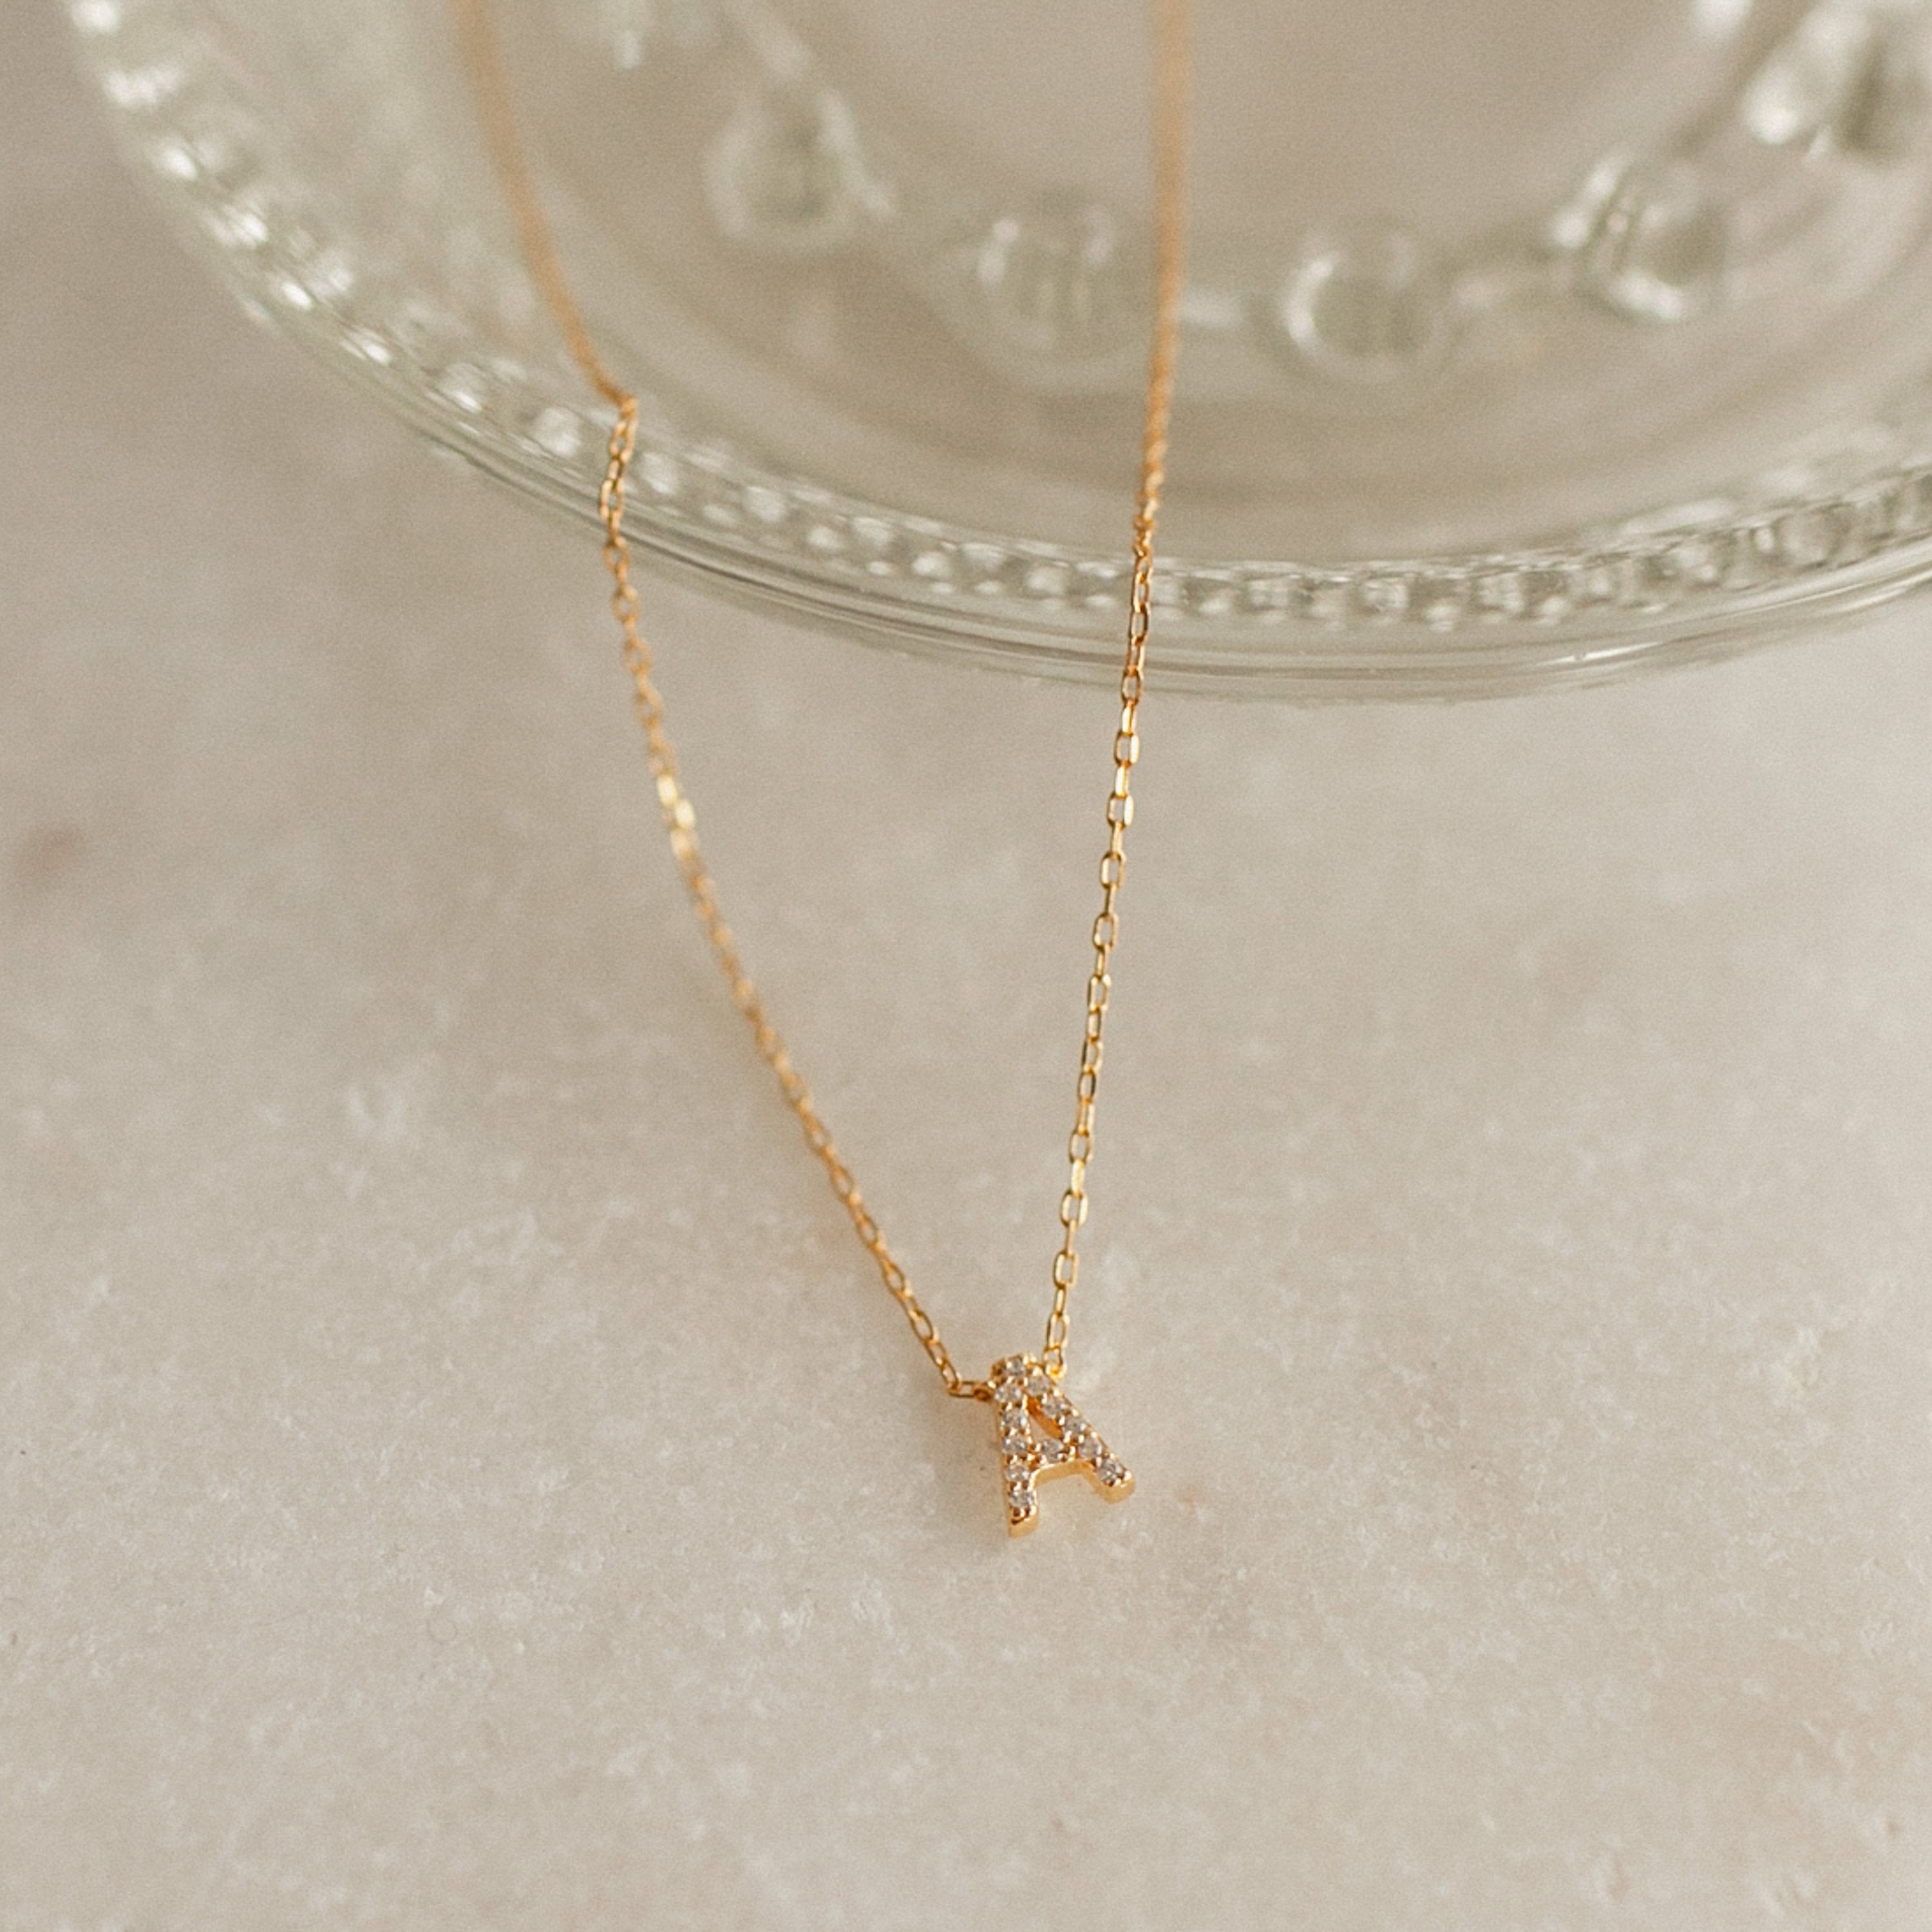 Dainty Gold Filled Initial Letter Charm Necklace – The Cord Gallery